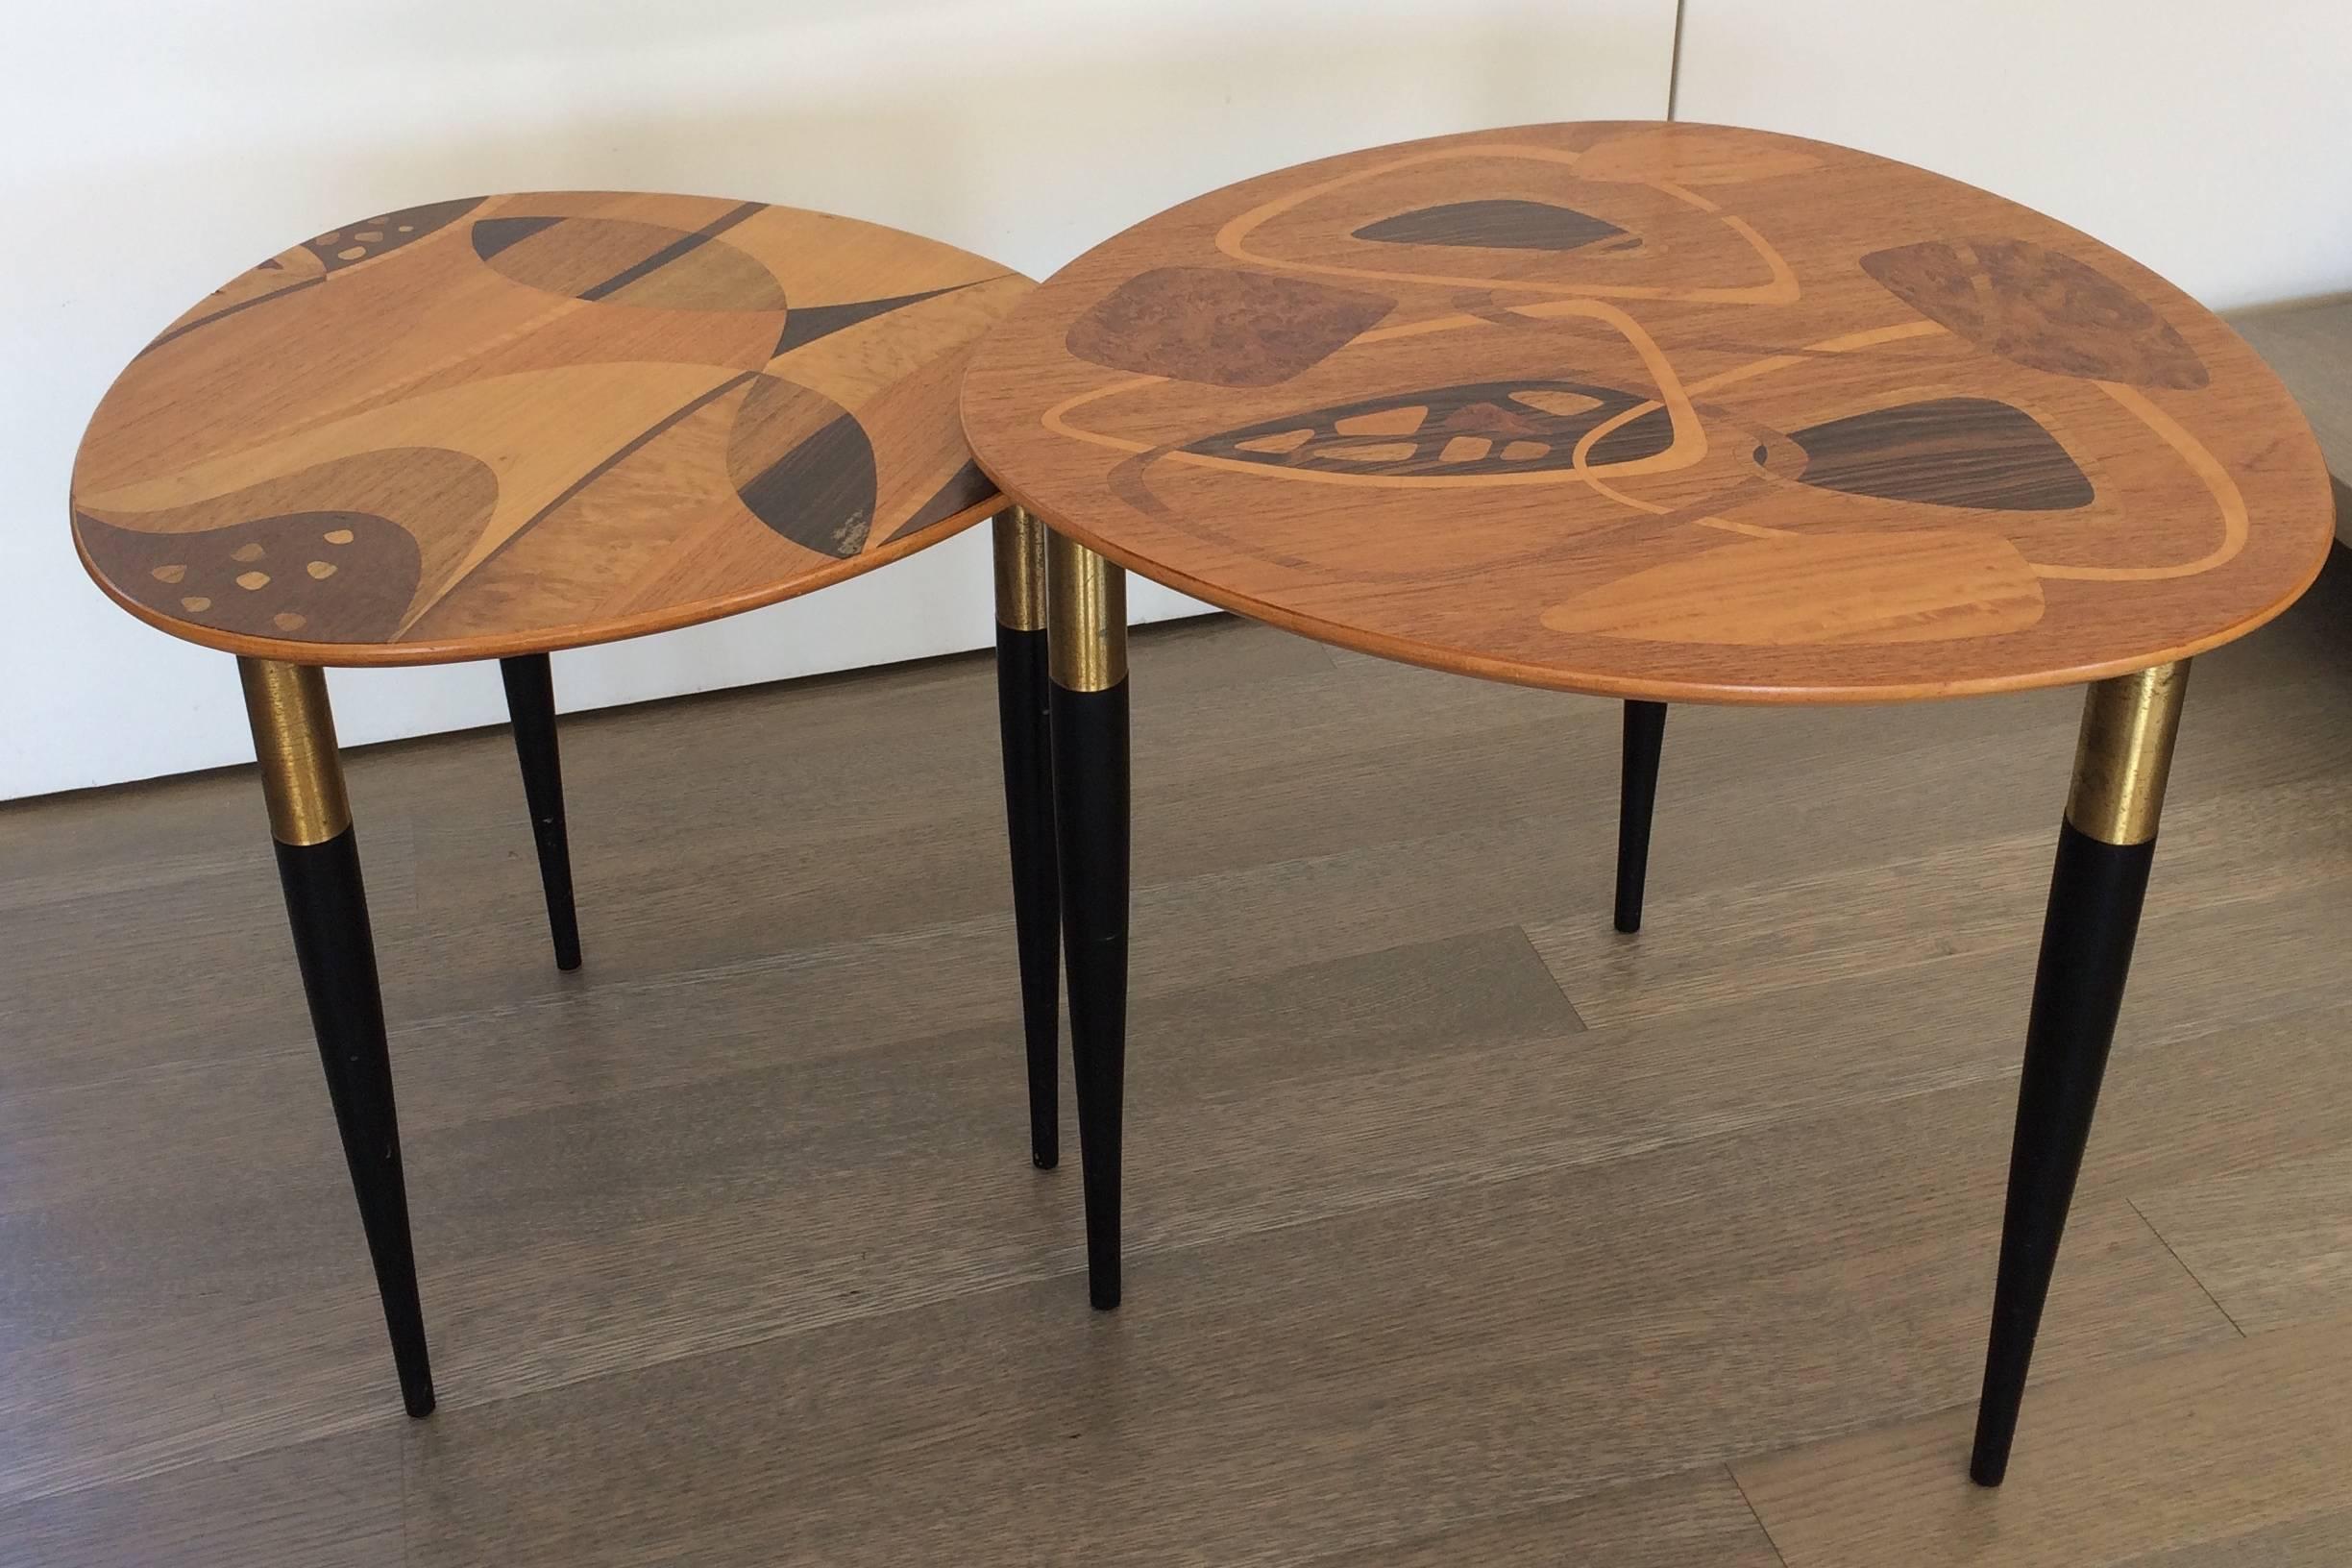 Swedish Exotic Wood Inlay Tables with Abstract Designs by Erno Fabry, Sweden, 1953